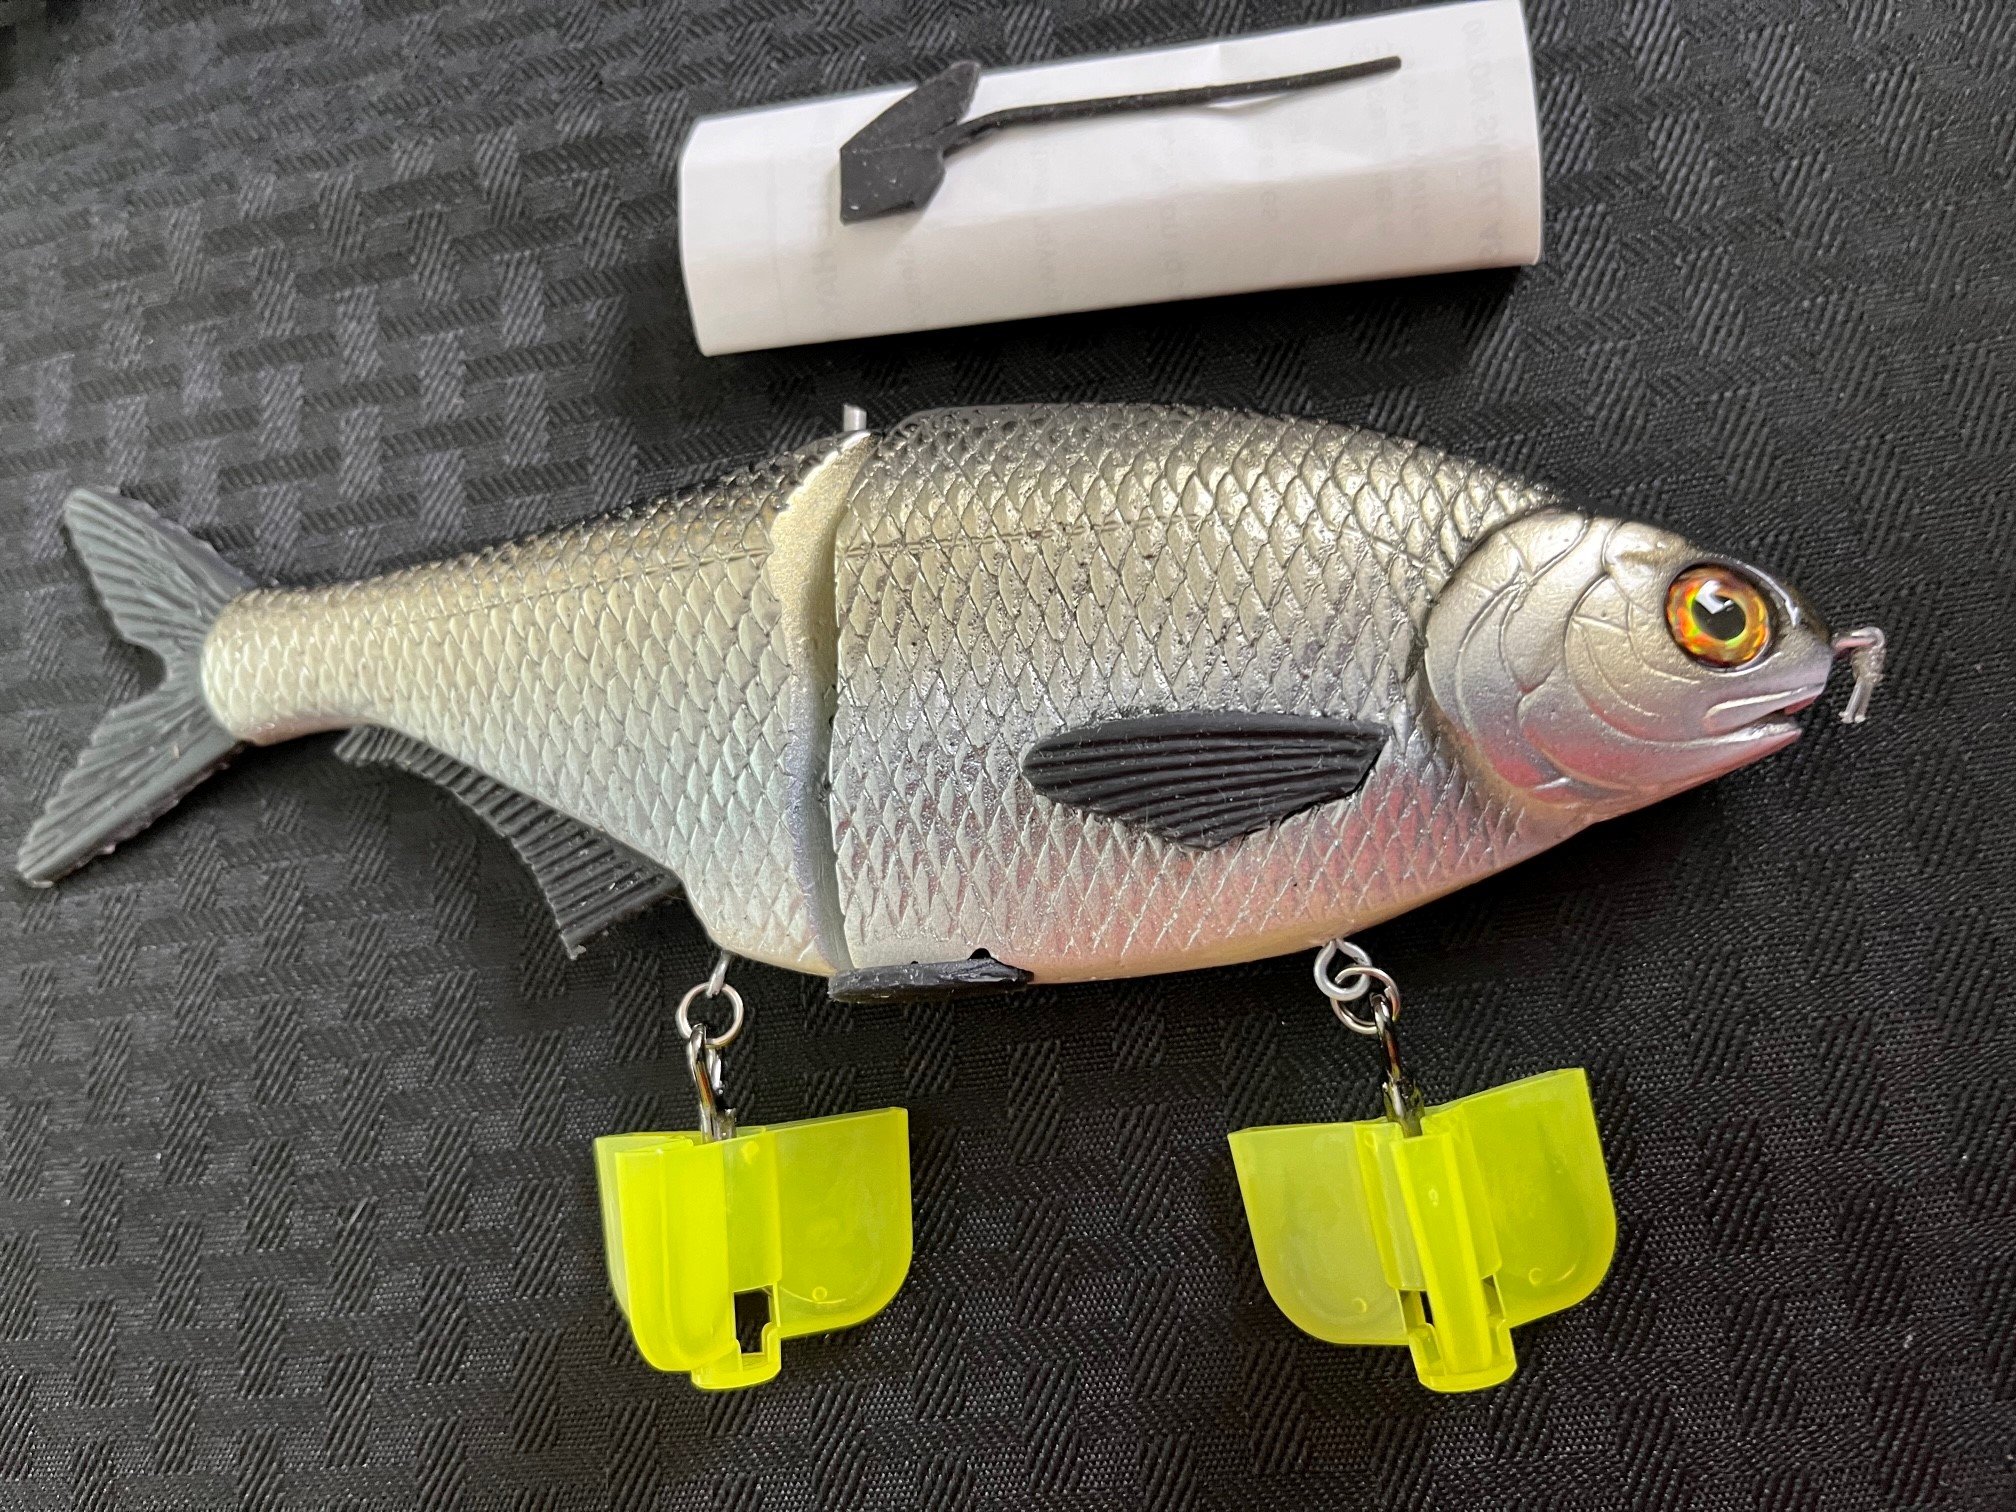 Production Carp by Hinkle Lures - Glide Baits on